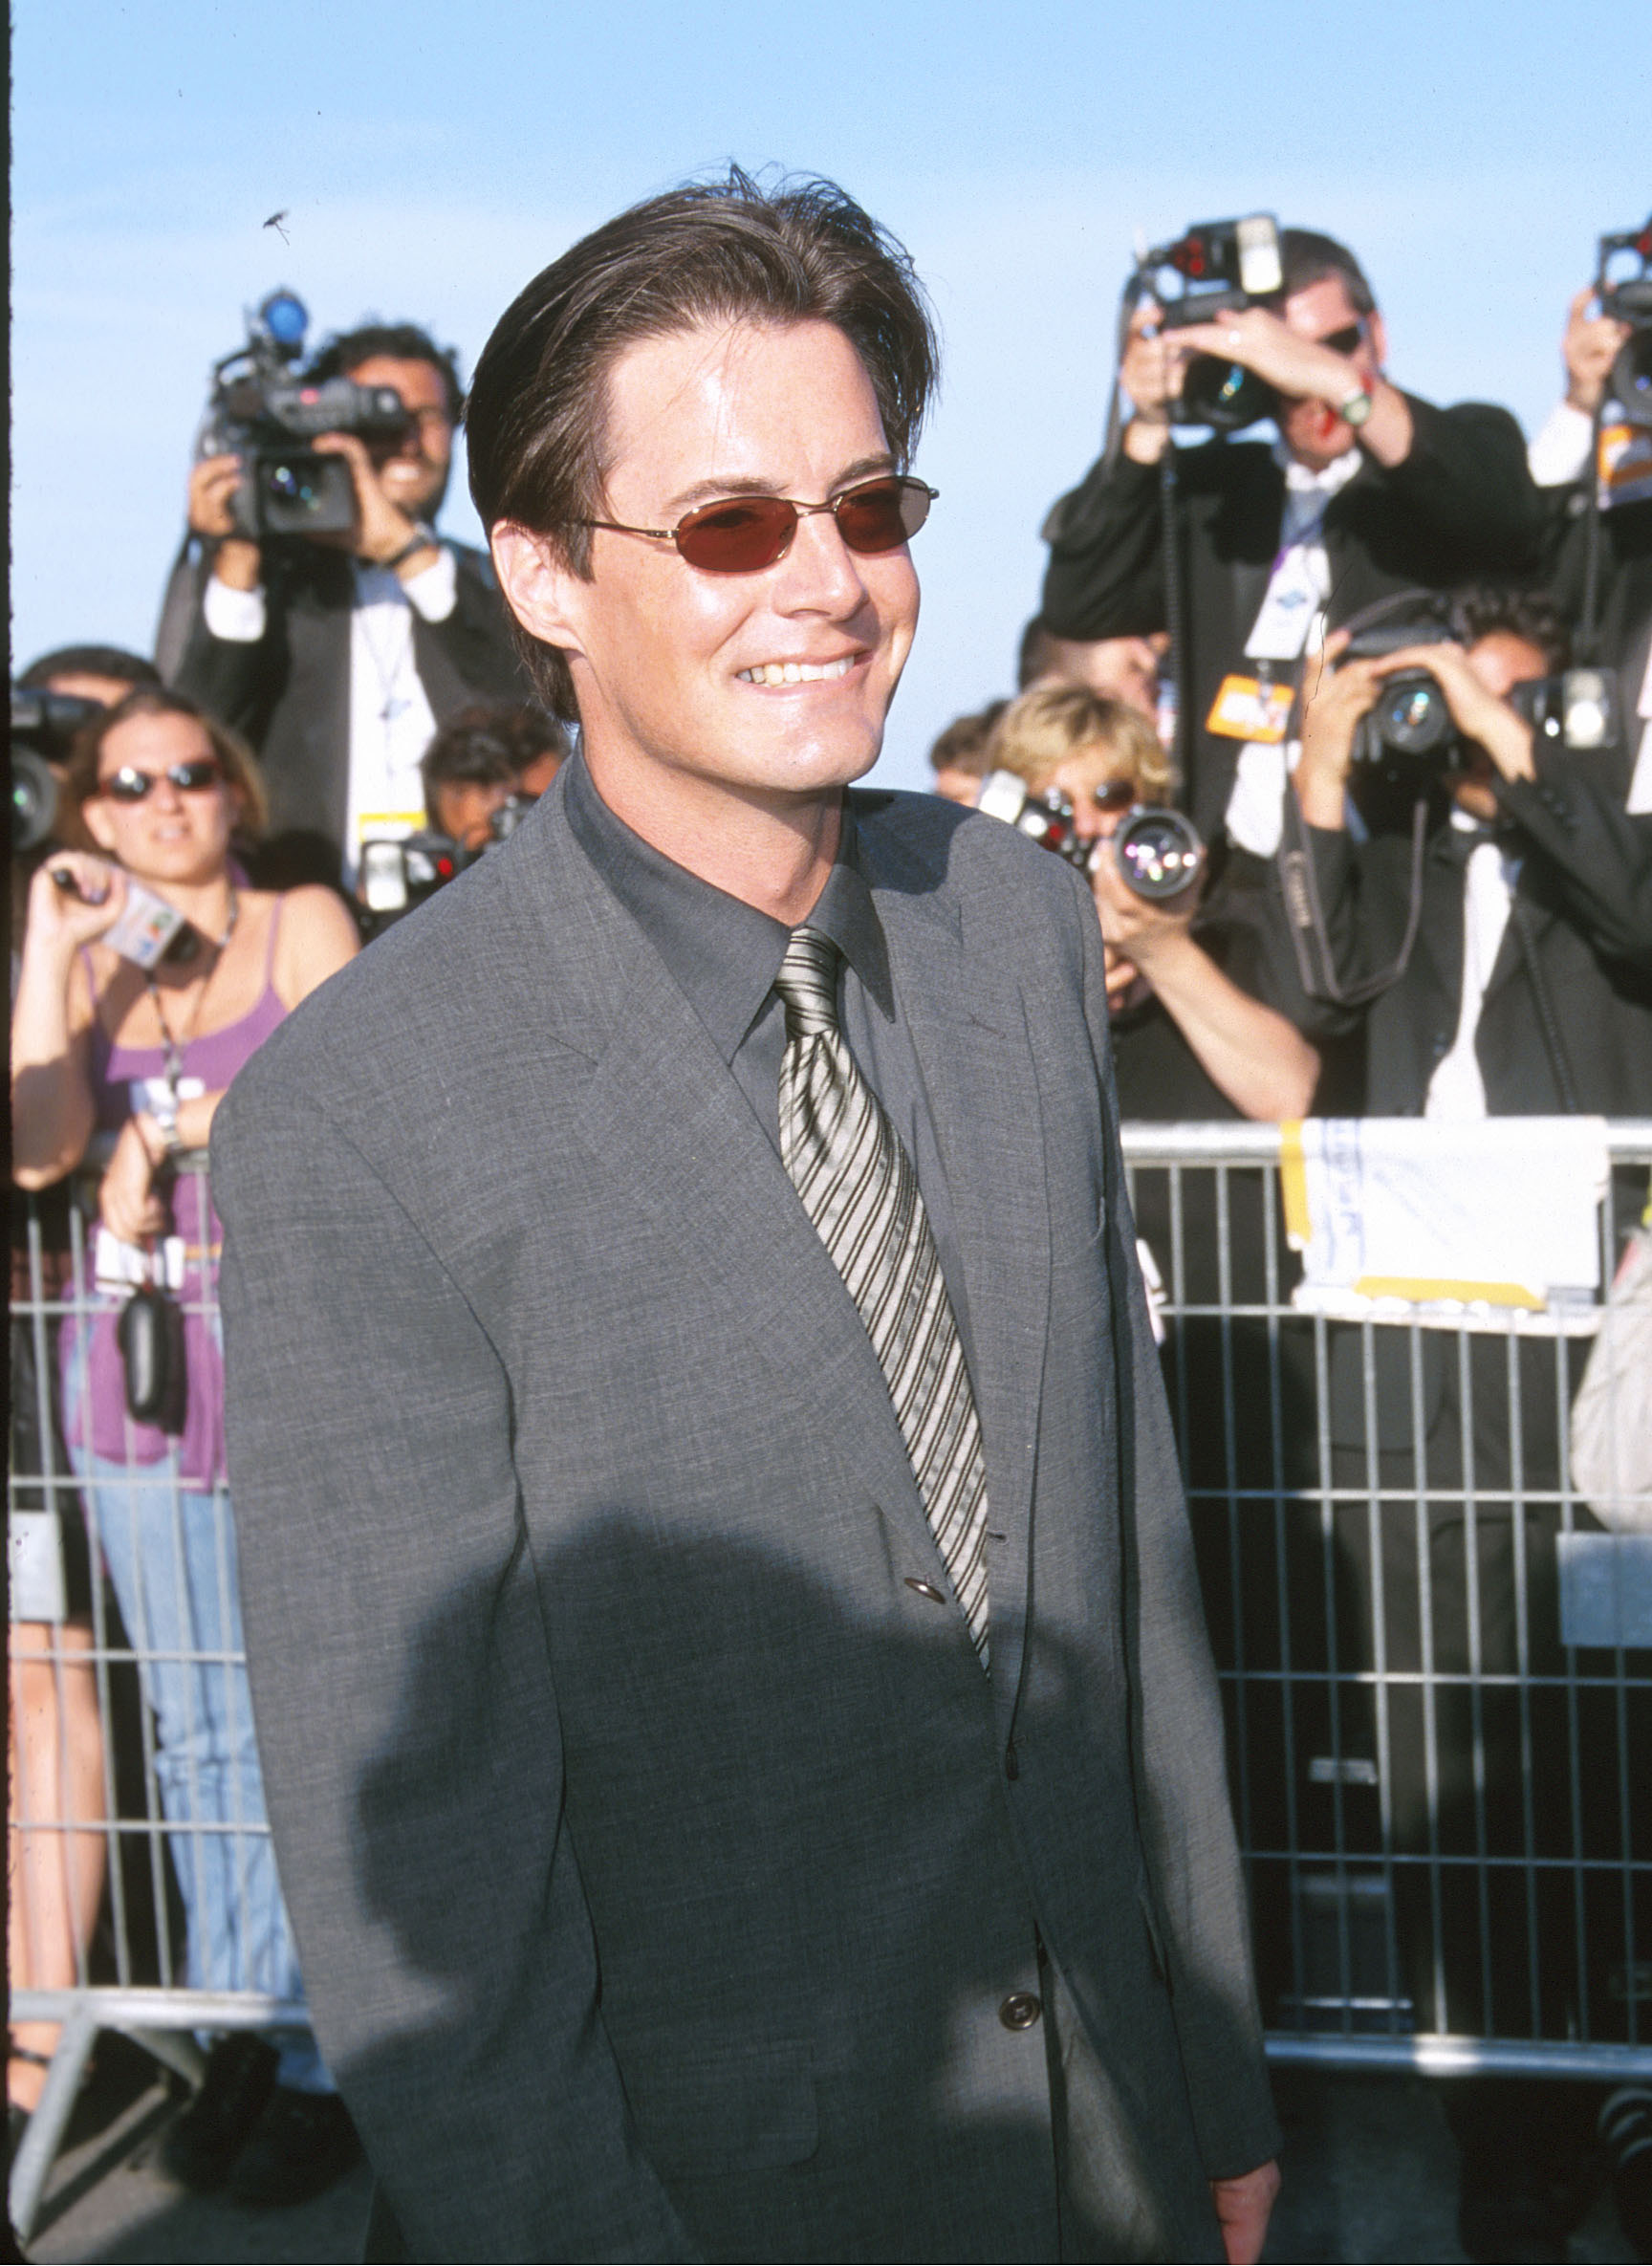 Kyle MacLachlan at the 53rd Cannes Film Festival in 2000 in France. | Source: Getty Images